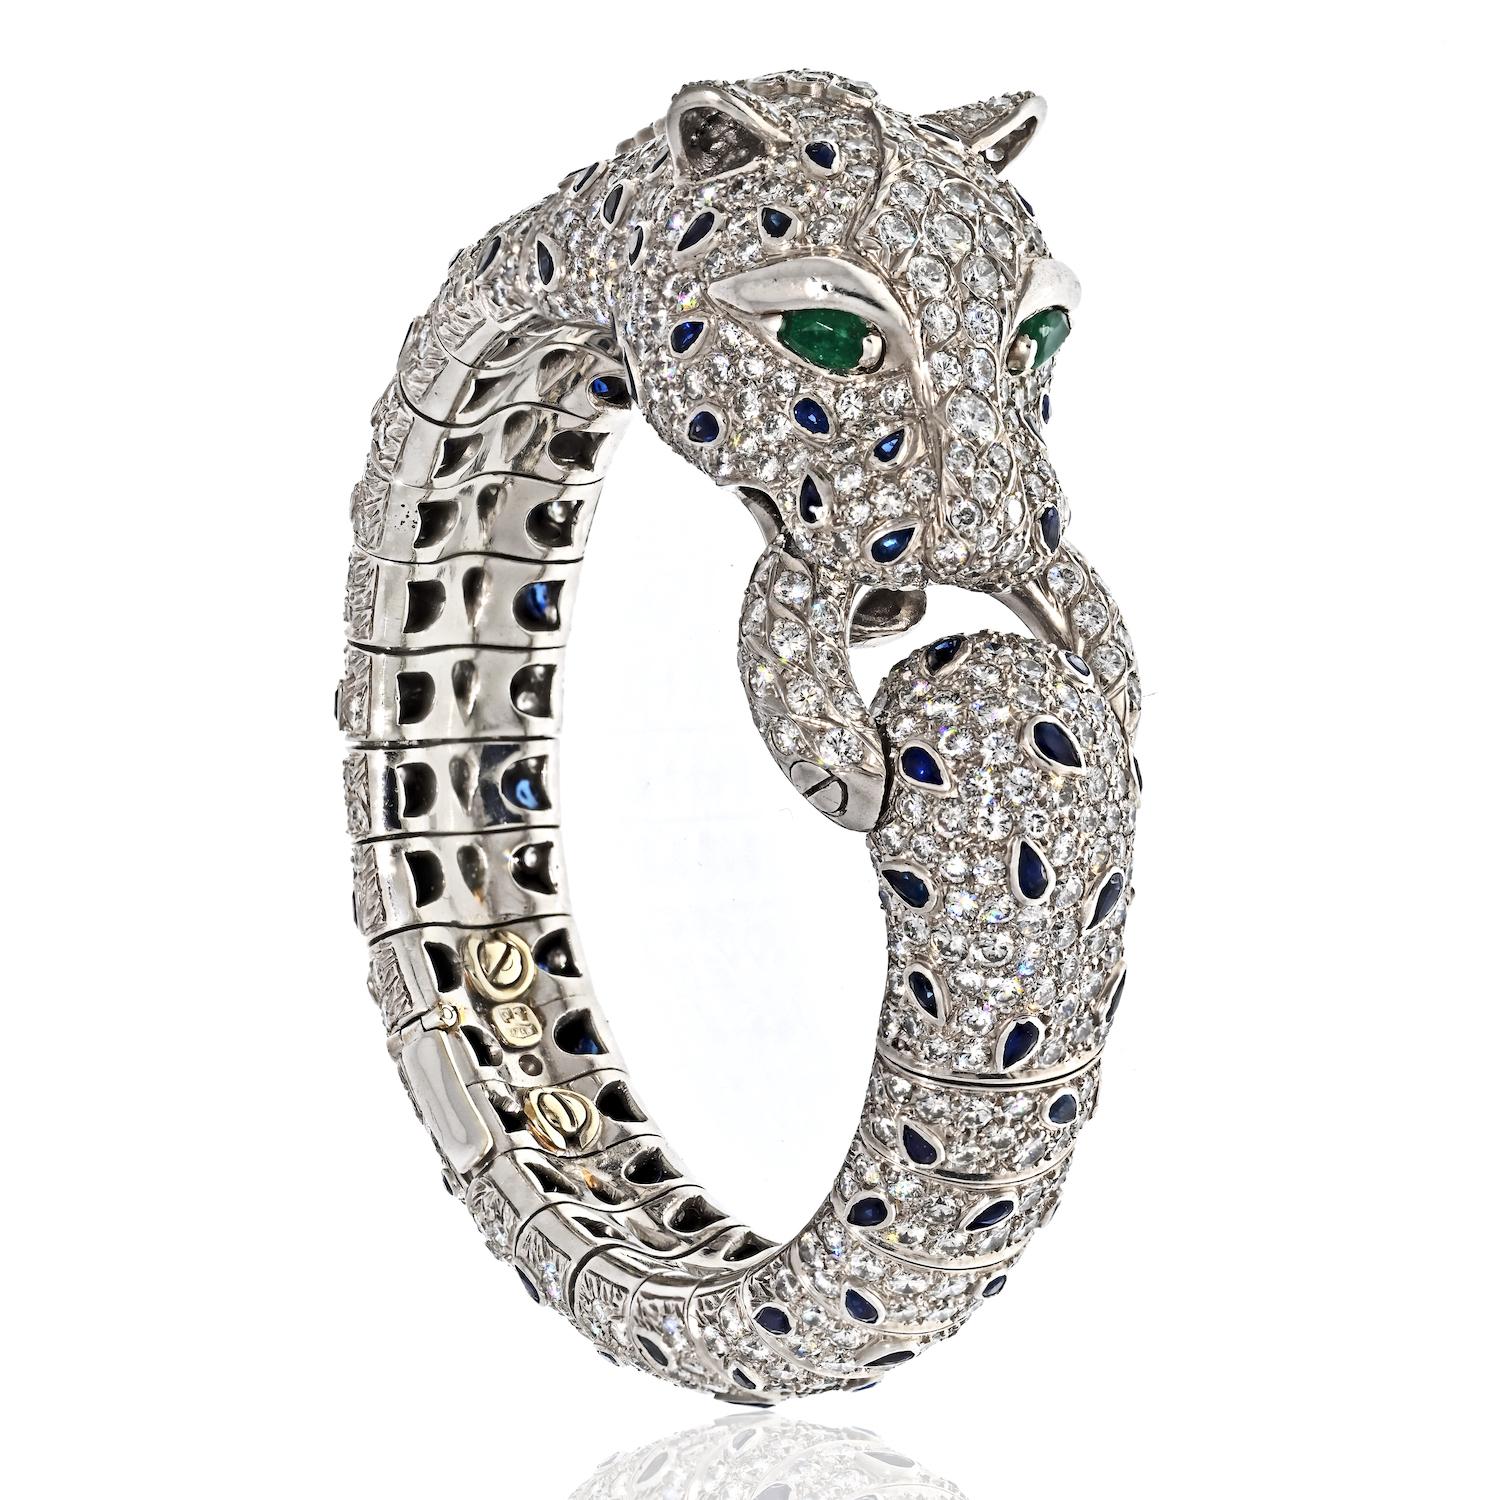 Introducing a magnificent piece of estate jewelry, the Platinum Panther Diamond and Sapphire Bracelet. This exquisite bracelet showcases the iconic panther motif, depicted as a fierce and elegant creature, biting on a dazzling ring. Crafted in